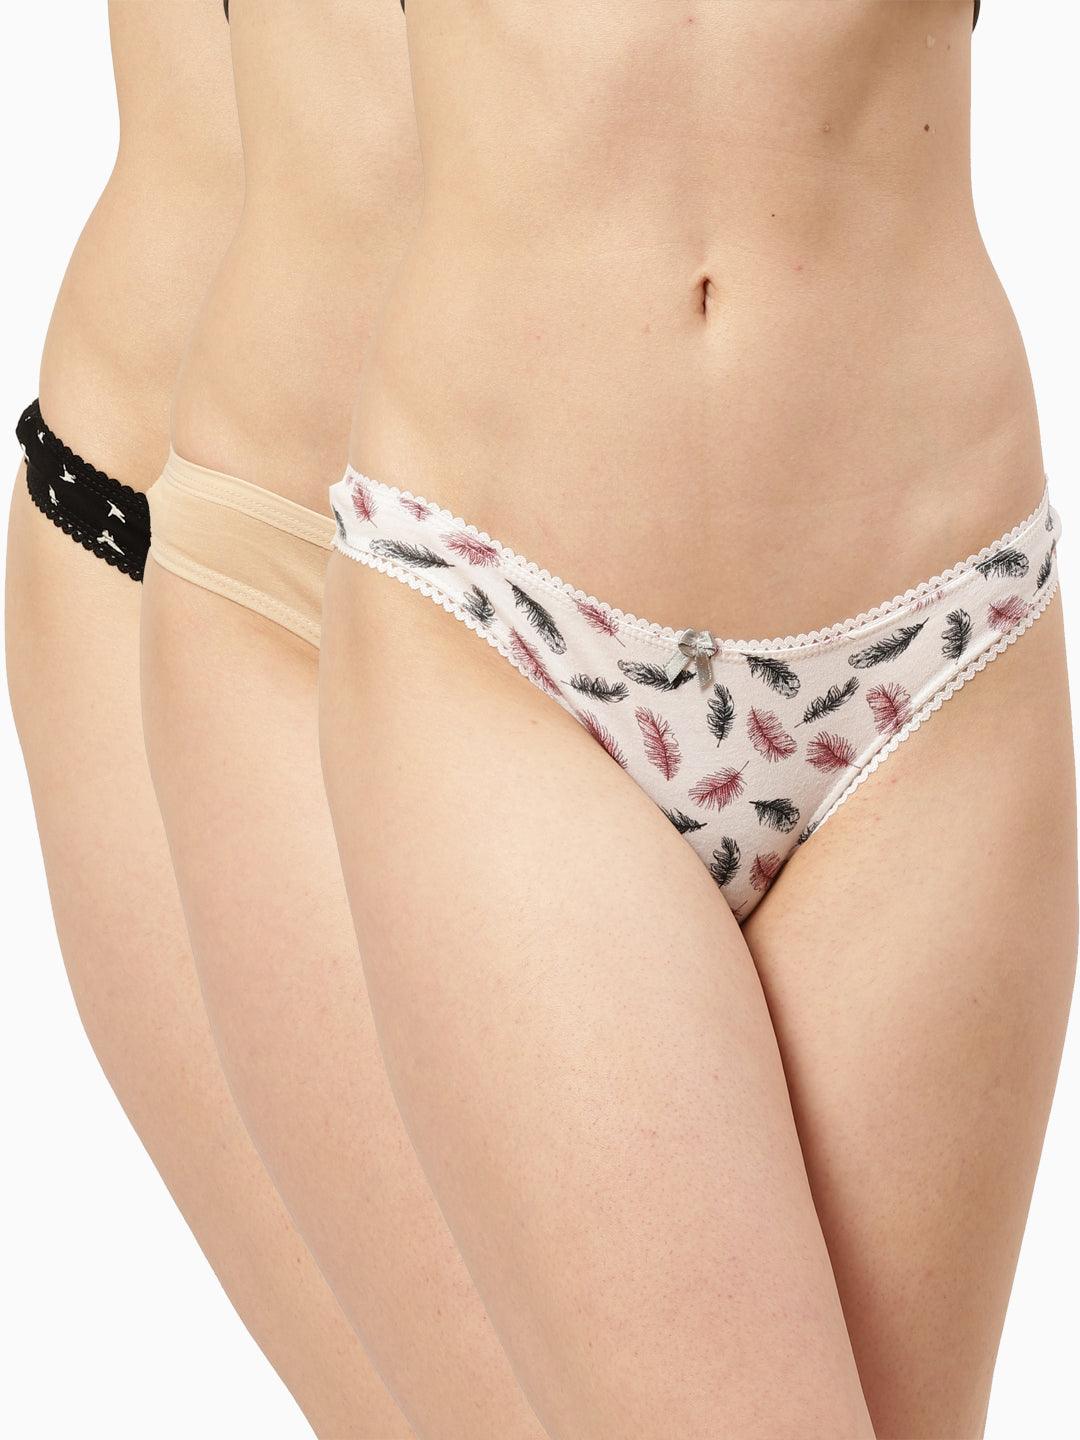 Fancy G-String Thong at Rs 25/piece, New Delhi